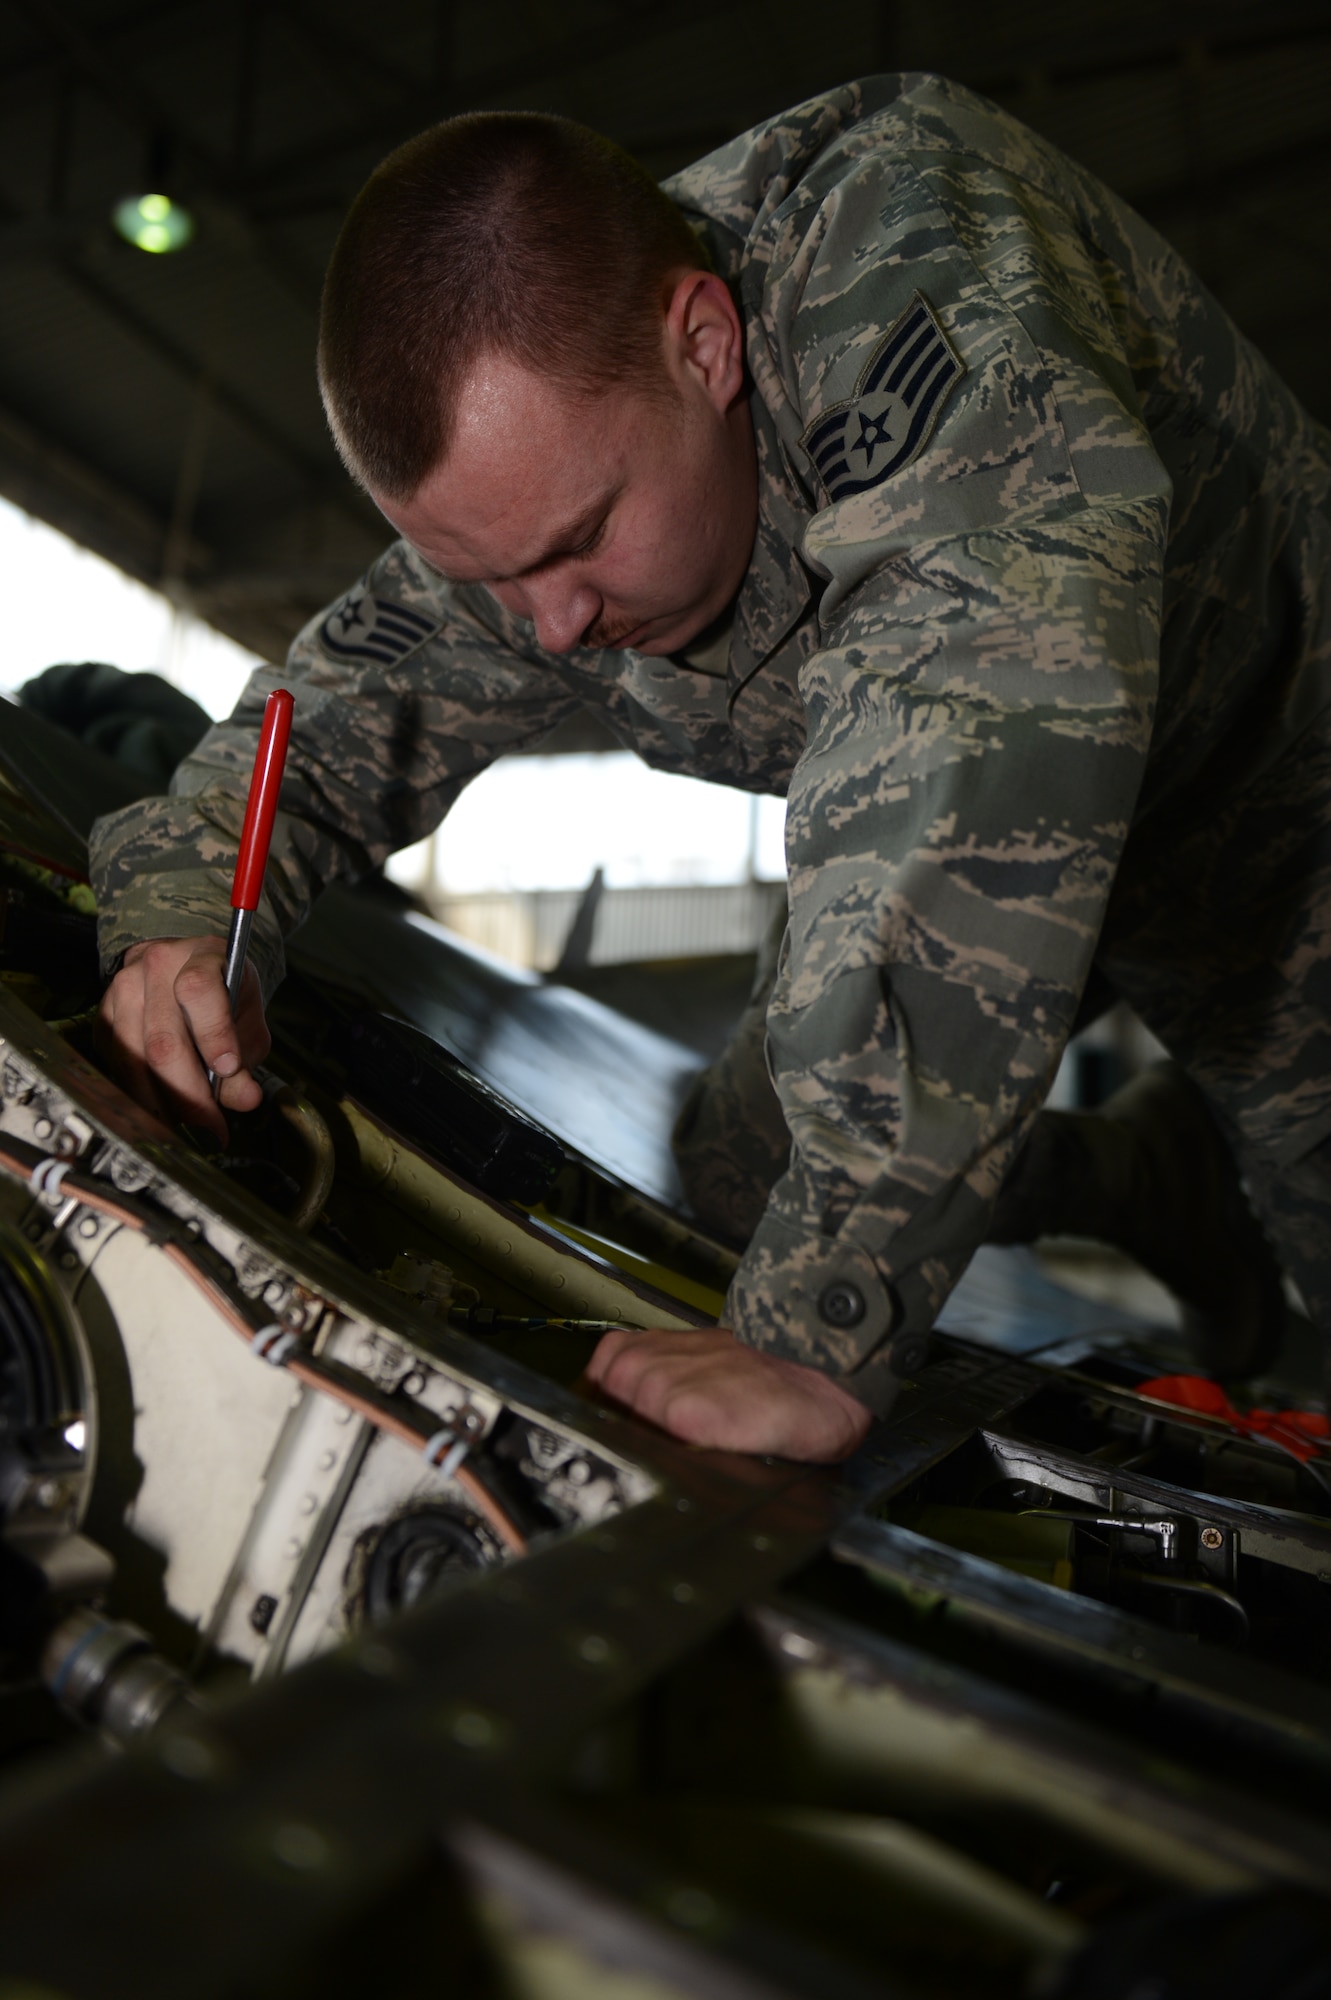 SPANGDAHLEM AIR BASE, Germany – U.S. Air Force Staff Sgt. Robert Arthur, 480th Aircraft Maintenance Unit weapons load crew team chief from Burgaw, N.C., uses a magnet to search for displaced metal fragments after replacing a weapon system on an U.S. Air Force F-16 Fighting Falcon fighter aircraft March 27, 2013. The weapon replacement takes place every 18 months to ensure all parts are clean and in working condition. Loose debris can damage the weapon system by jamming or destroying internal components. (U.S. Air Force photo by Airman 1st Class Gustavo Castillo/Released)